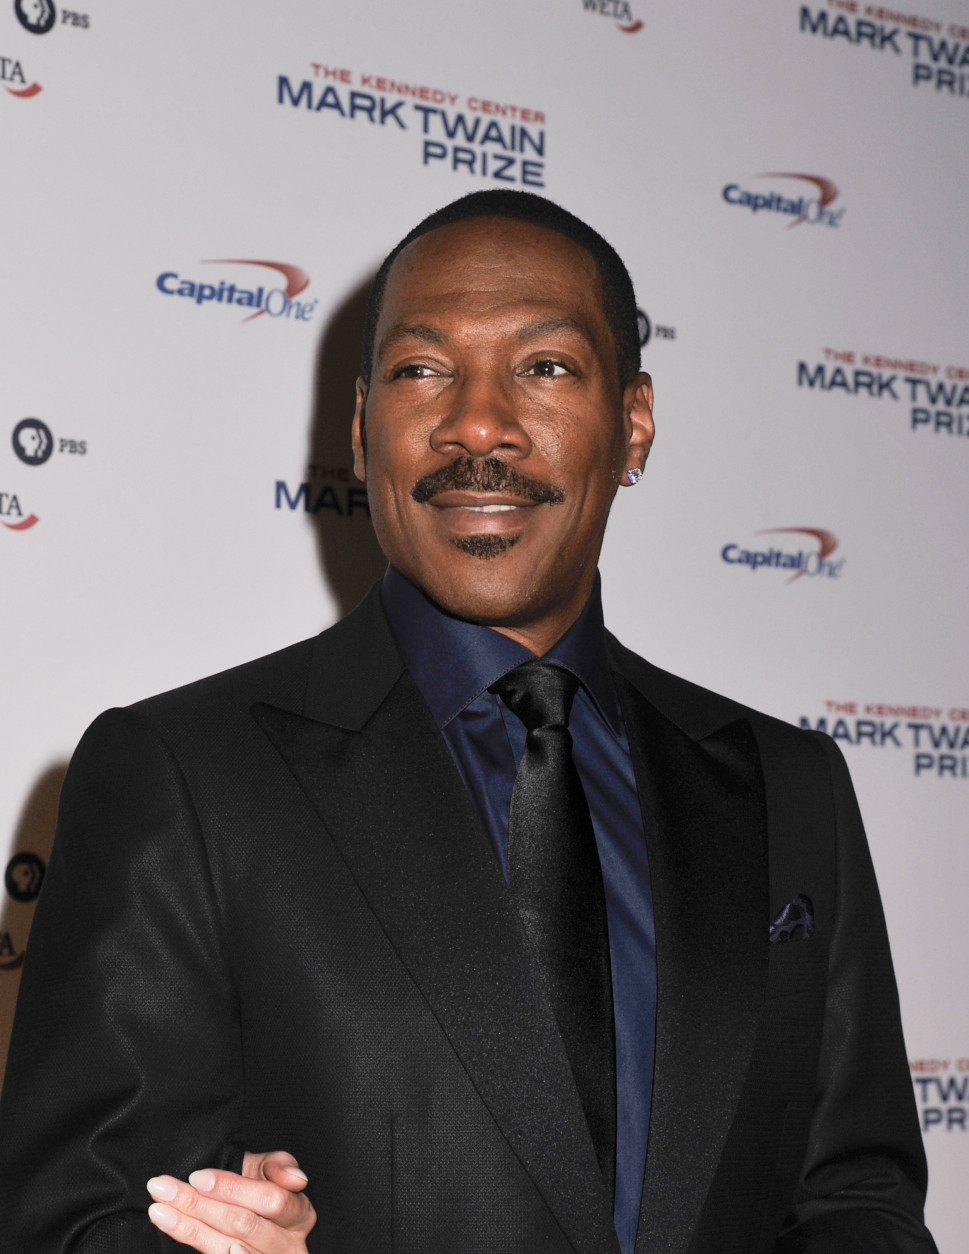 WASHINGTON, DC- OCTOBER 18:  Honoree Eddie Murphy poses on the red carpet during the 18th Annual Mark Twain Prize For Humor at The John F. Kennedy Center for Performing Arts on October 18, 2015 in Washington, DC.   (Photo by Kris Connor/Getty Images)